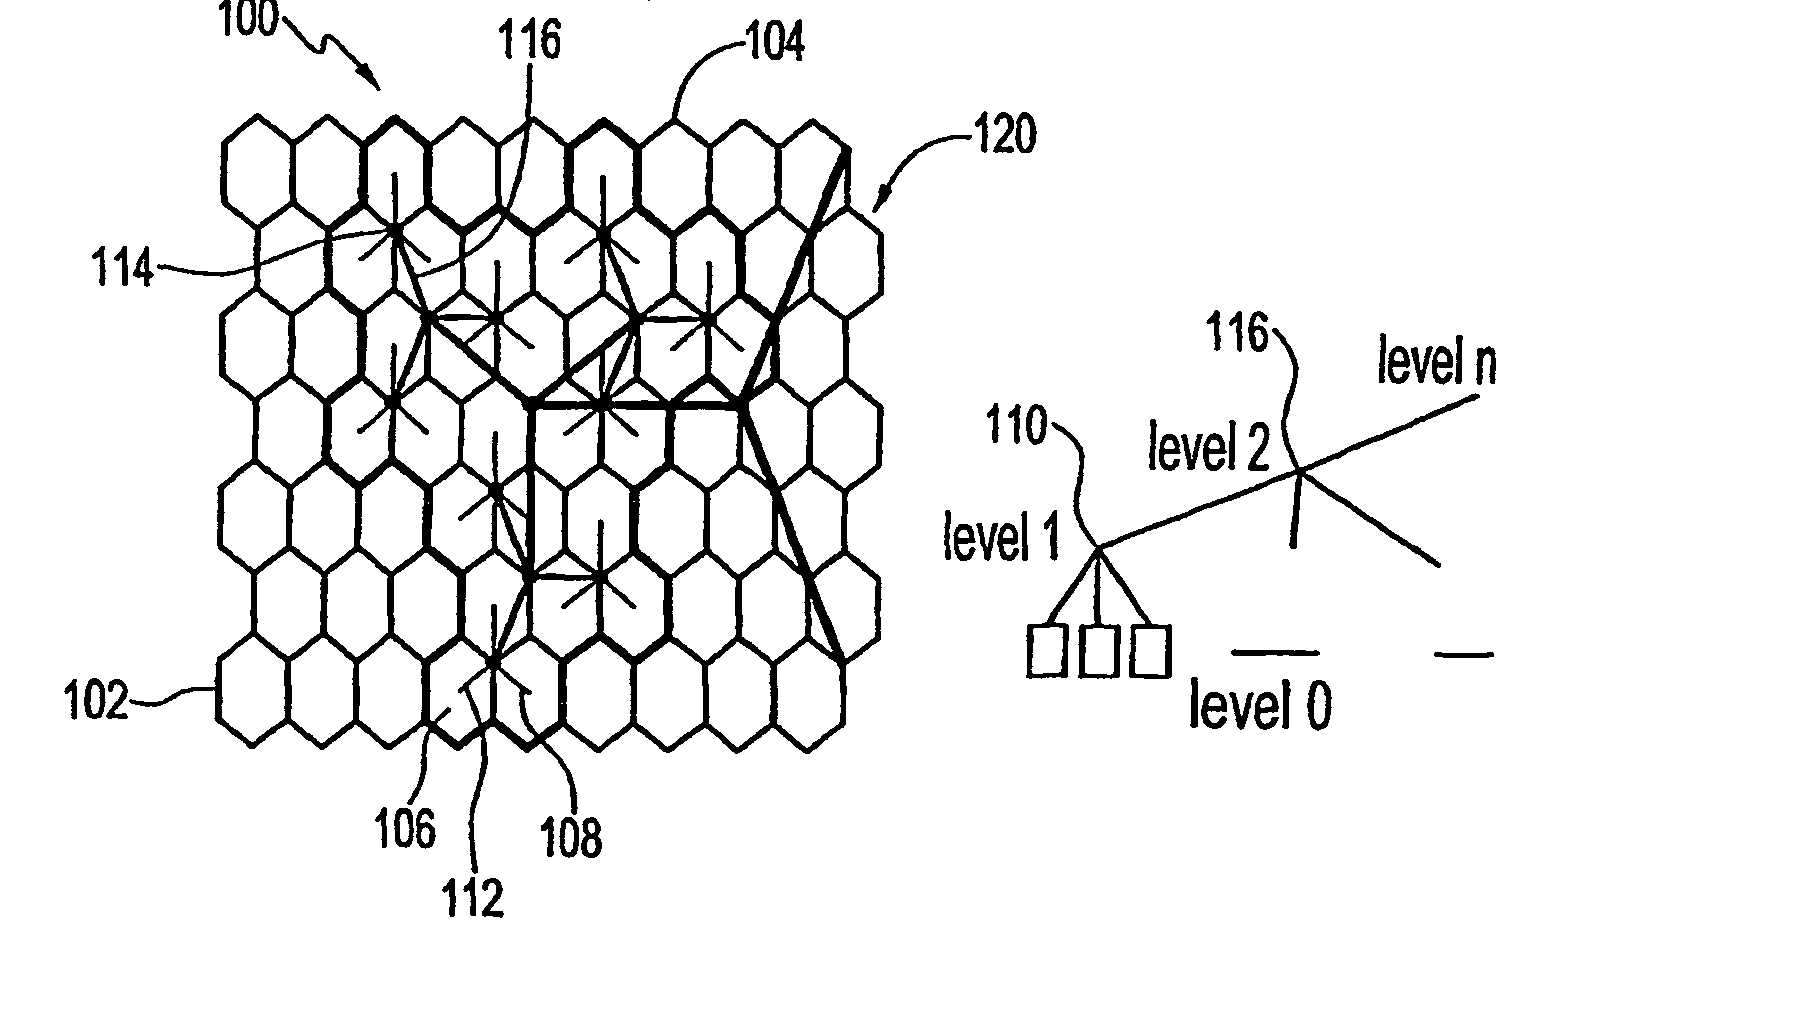 Interconnection architecture and method of assessing interconnection architecture